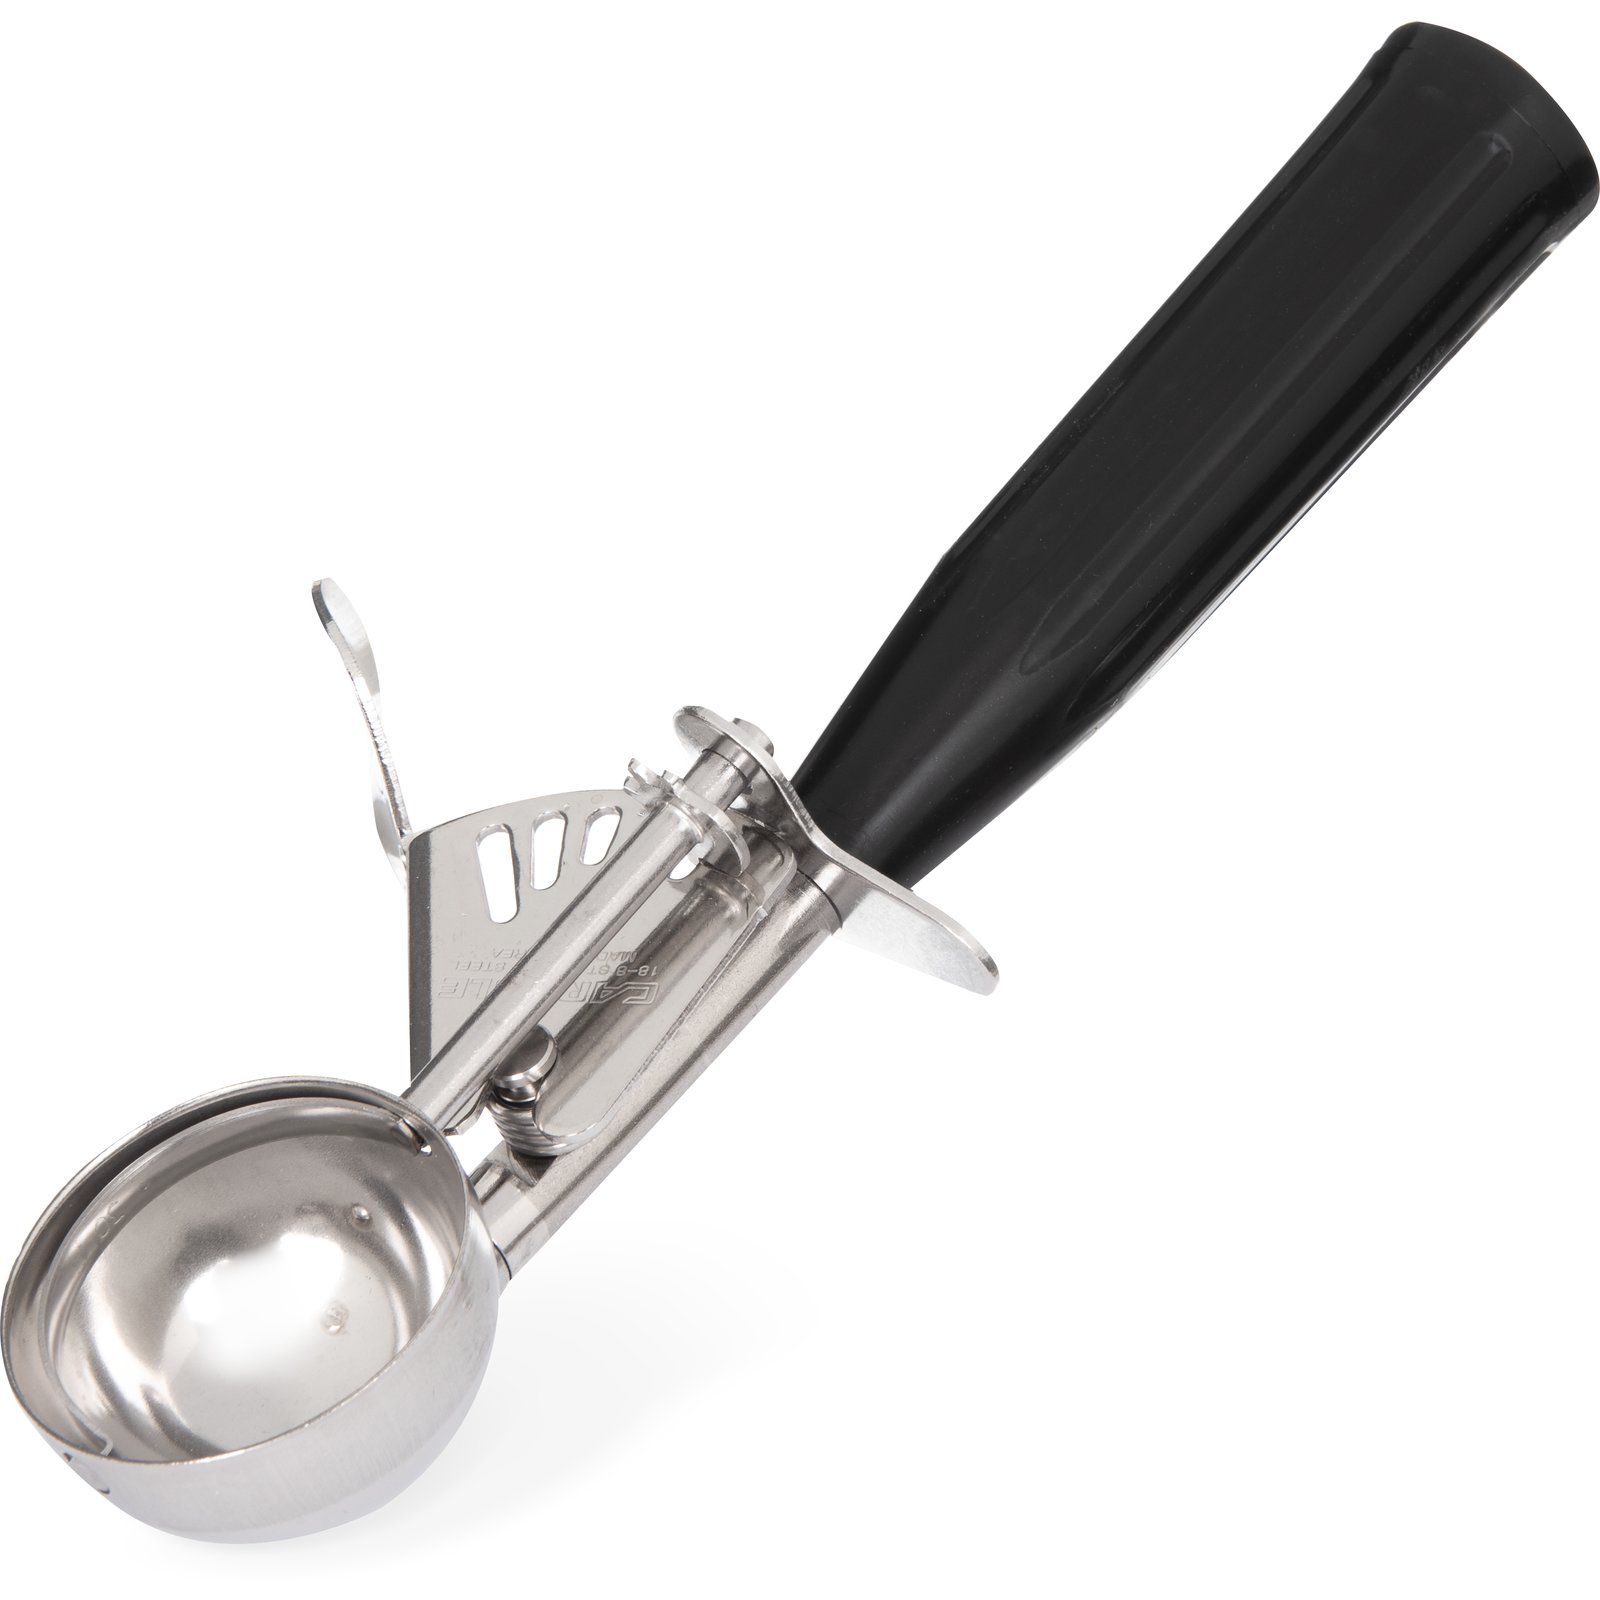 60300-30 - Stainless Steel Disher Scoop #30 Size 1.3 oz - Black